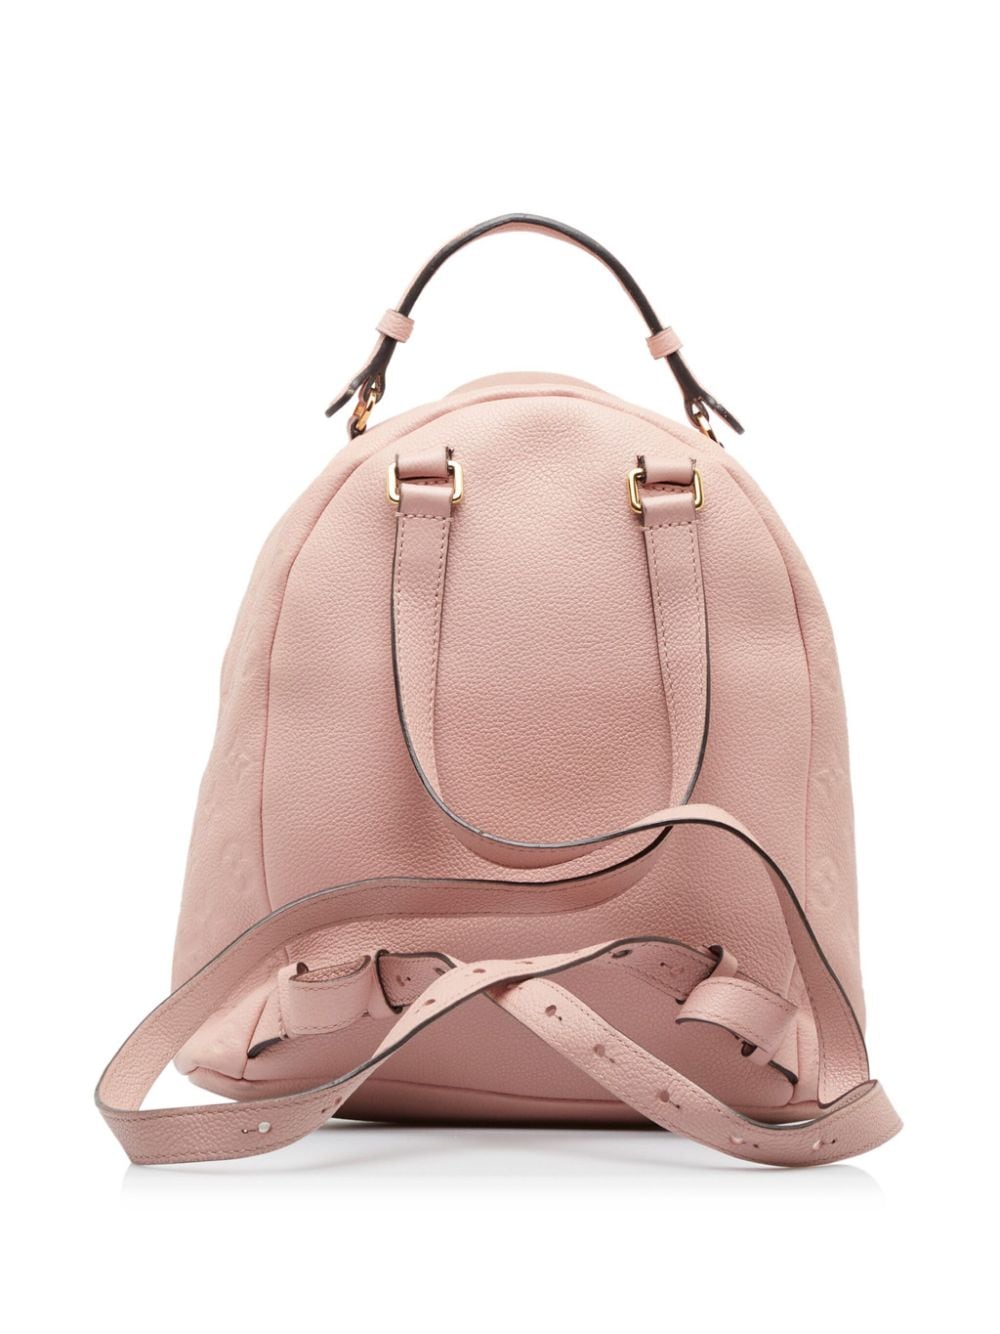 Louis Vuitton 2017 Pre-owned Sorbonne Backpack - Pink